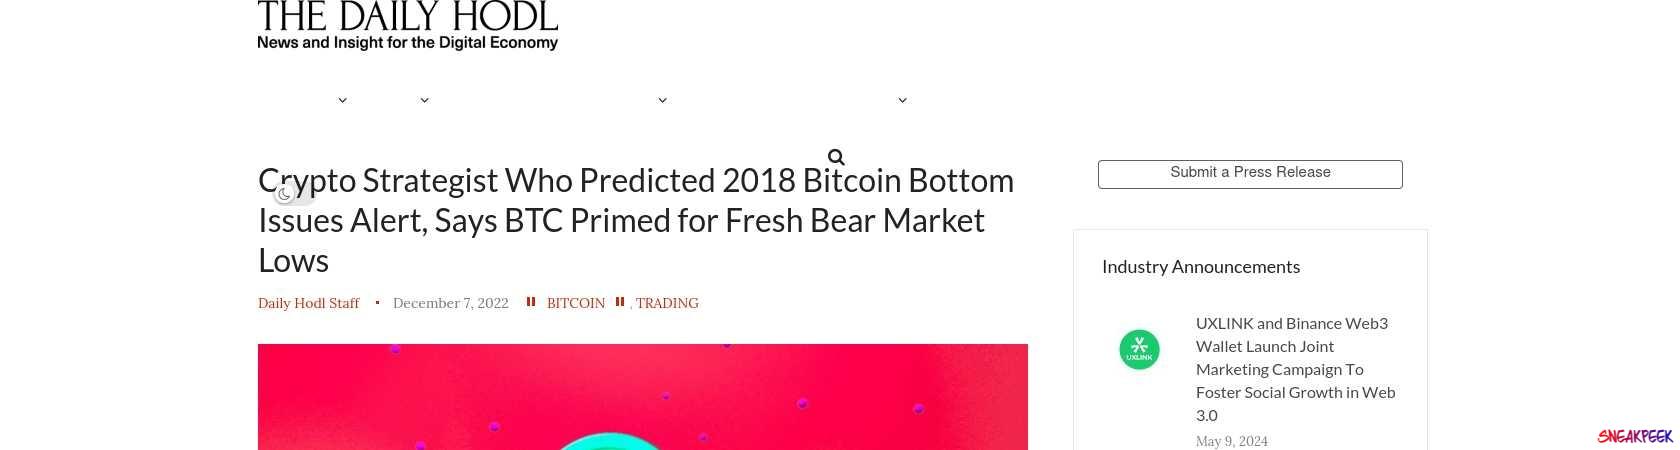 Read the full Article:  ⭲ Crypto Strategist Who Predicted 2018 Bitcoin Bottom Issues Alert, Says BTC Primed for Fresh Bear Market Lows